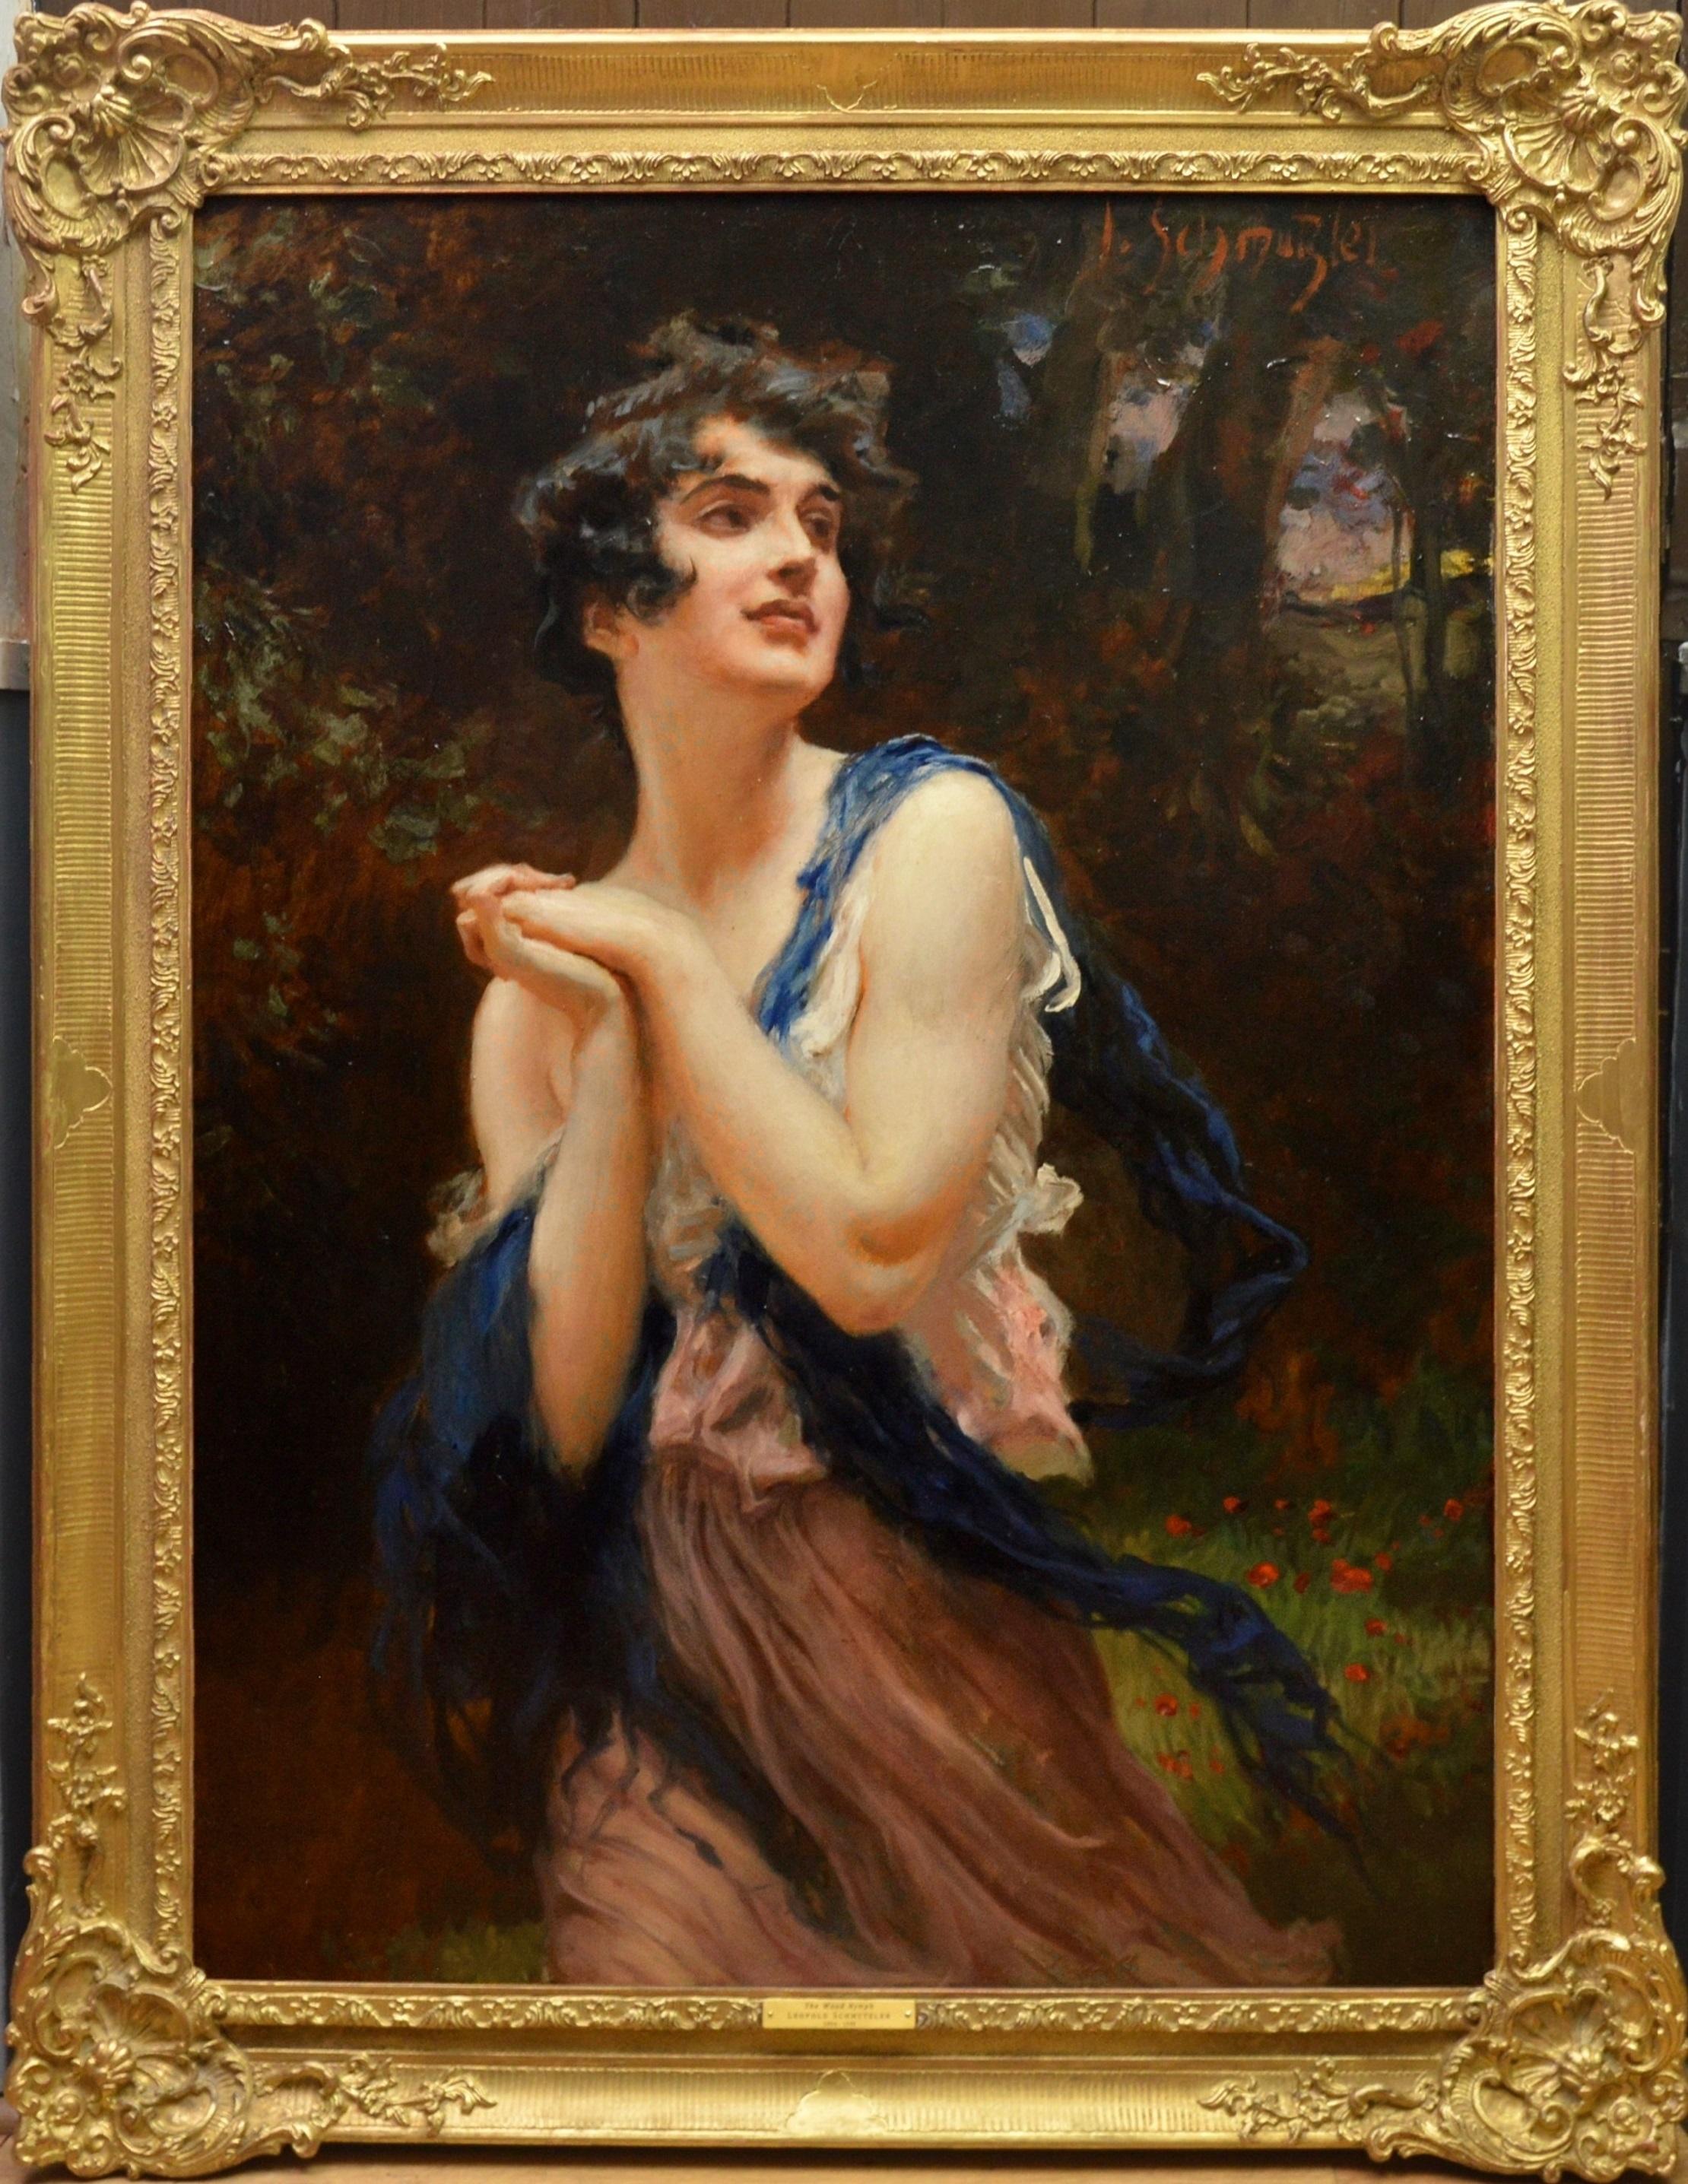 Leopold Schmutzler Figurative Painting - The Wood Nymph - Early 20th Century Portrait Oil Painting of Beautiful Brunette